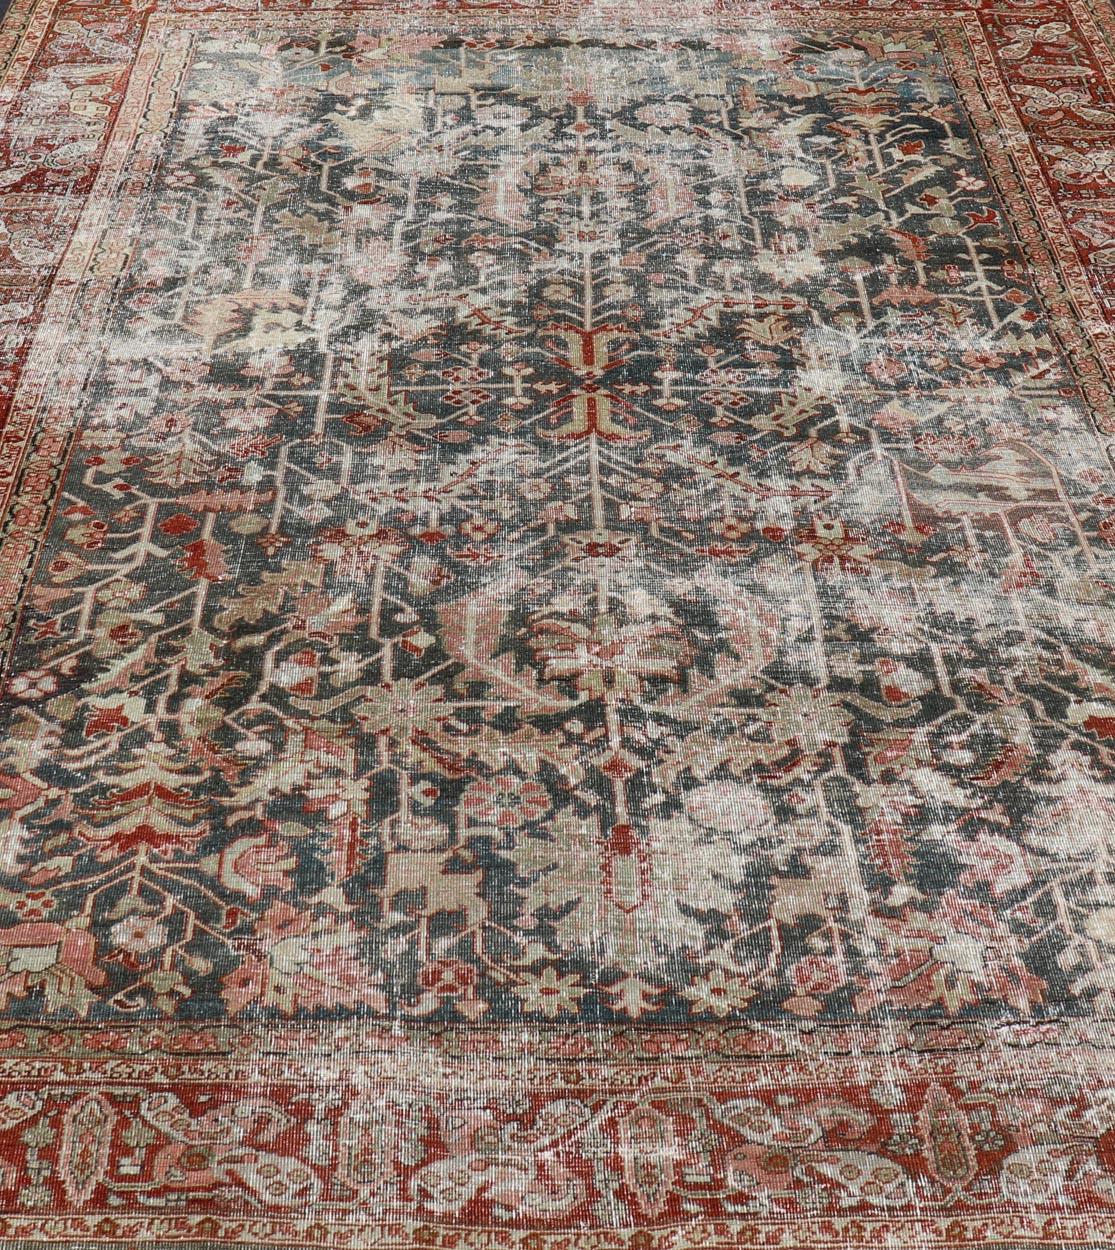 Persian Antique Heriz Rug with All-Over Geometric Design in Gray-Blue and Red. Keivan Woven Arts / Rug / LH-A38498, country of origin / type: Iran /Heriz, circa 1910. 
Measures: 8'5 x 11'2 
This lovely Antique Heriz rug, hailing from northwestern